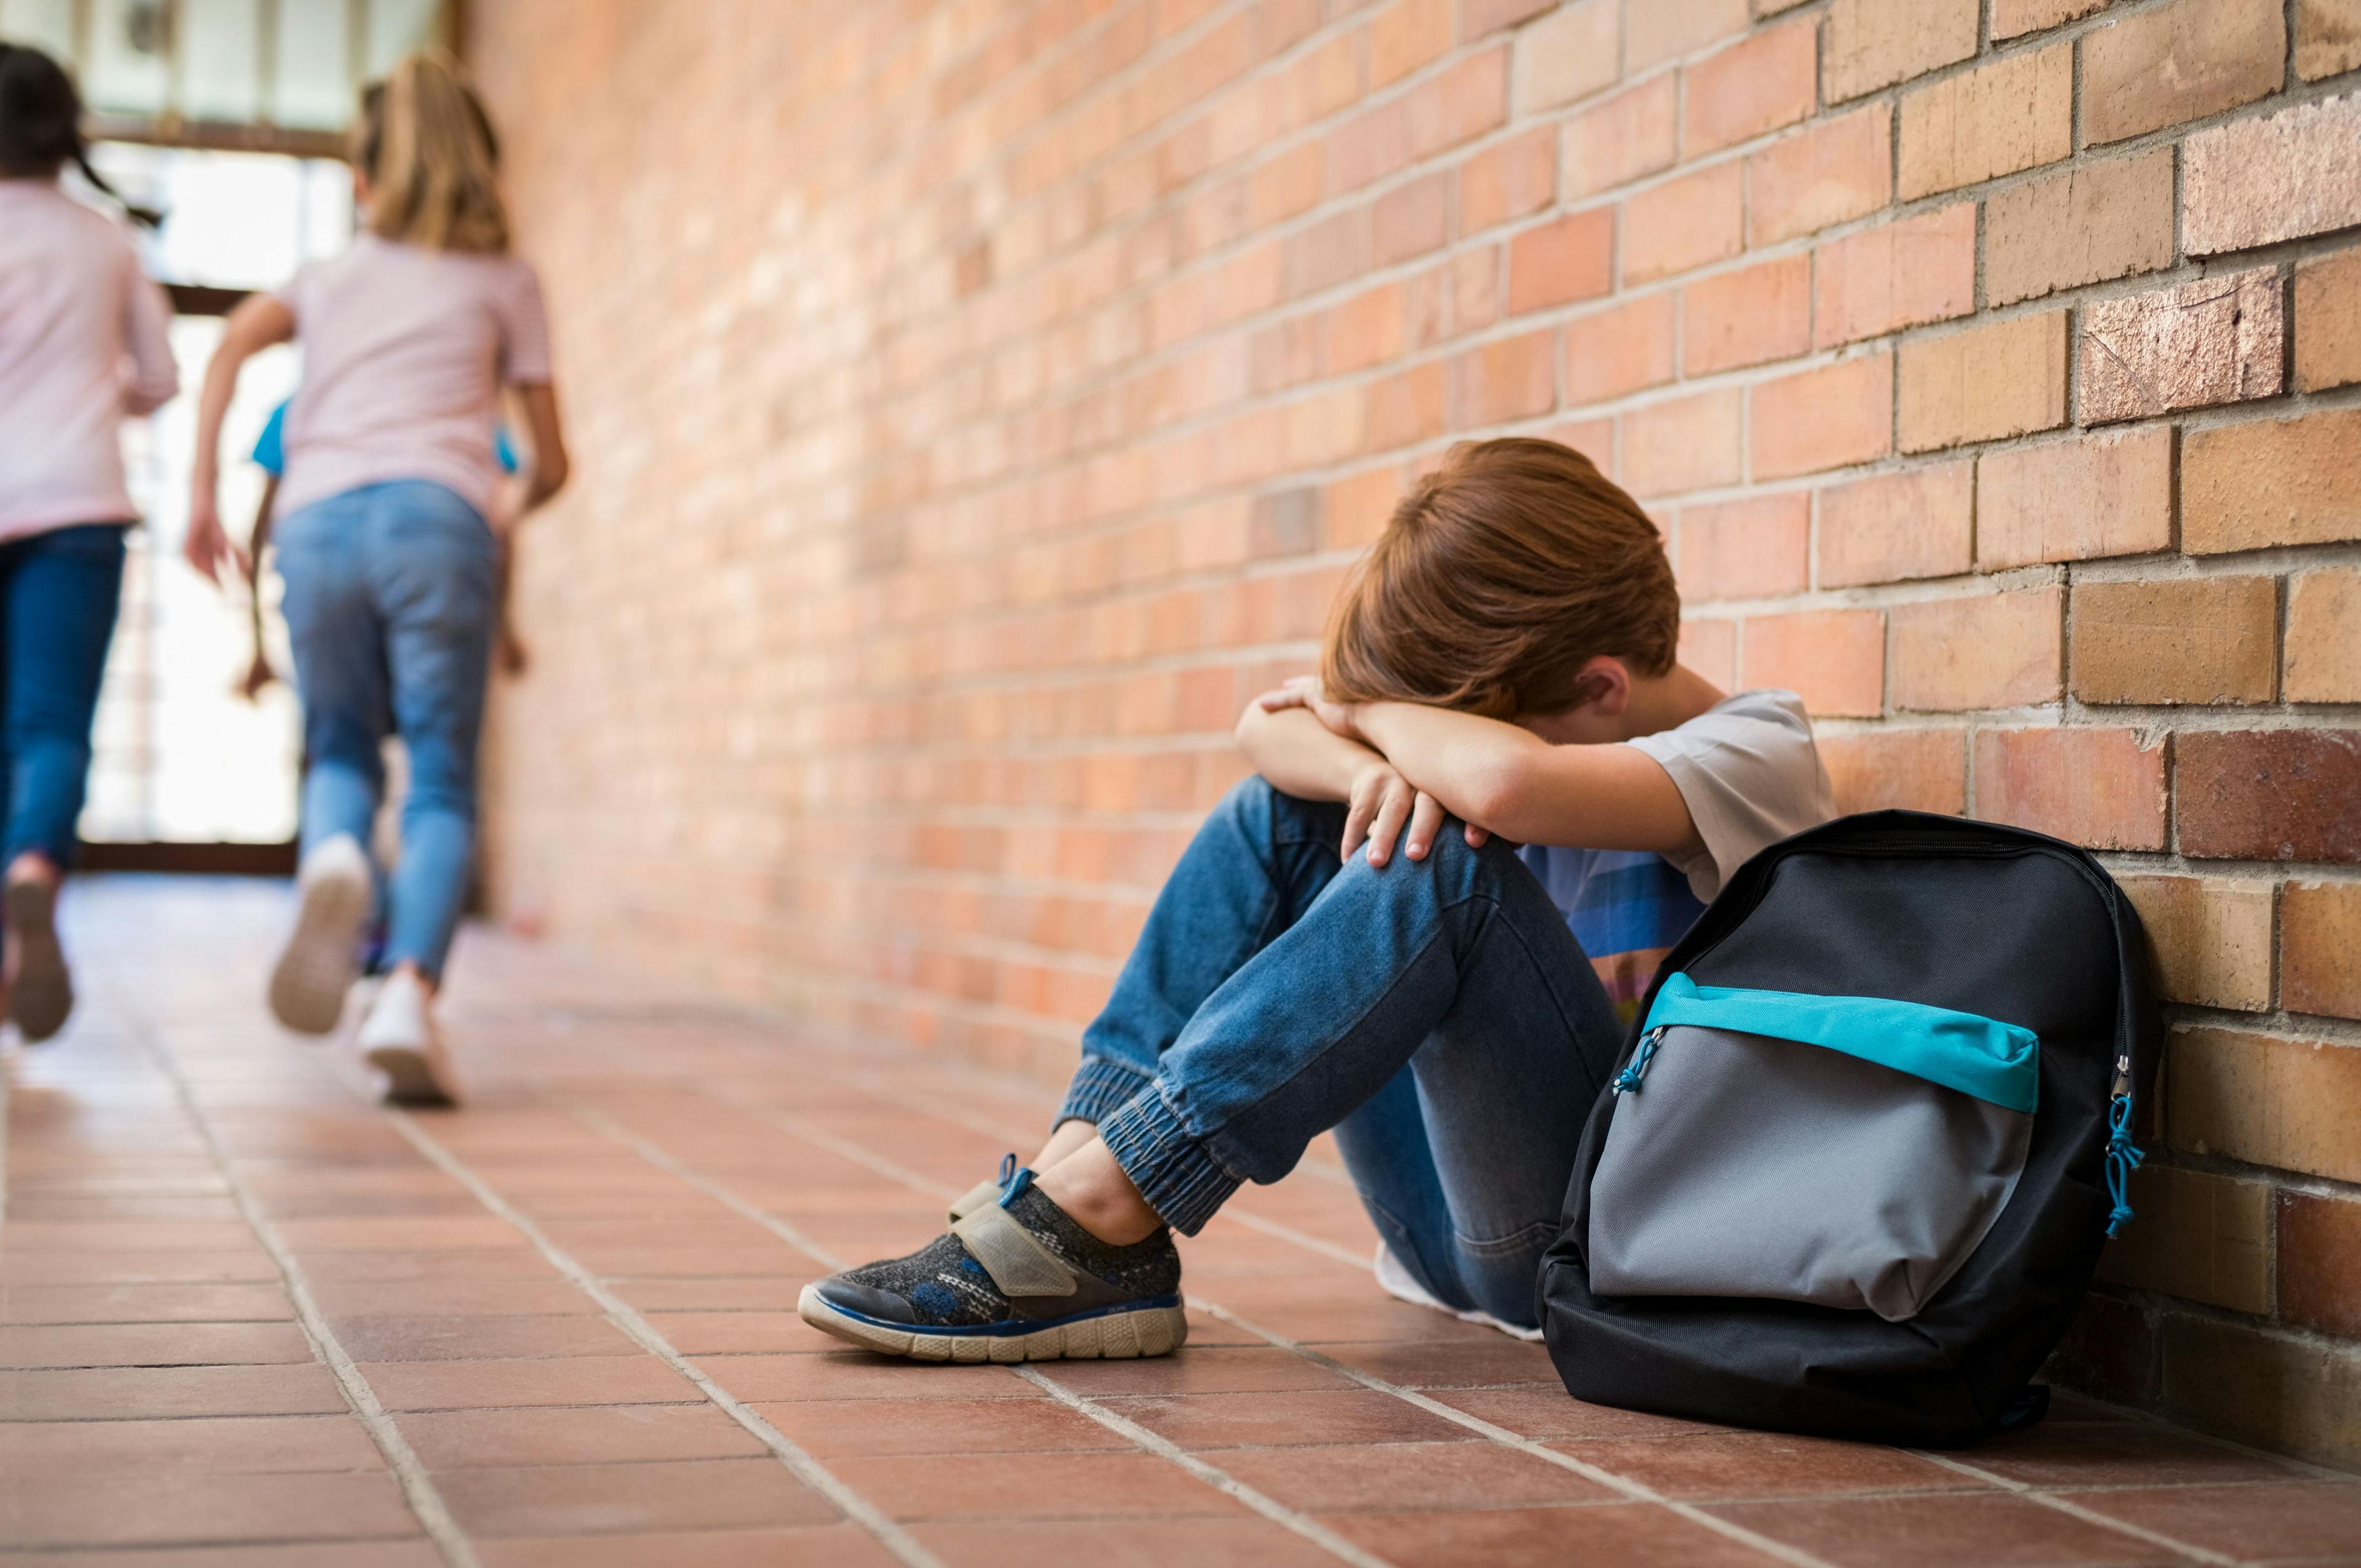 little boy crying at school while group of students run away | Image Credit: Rido - stock.adobe.com